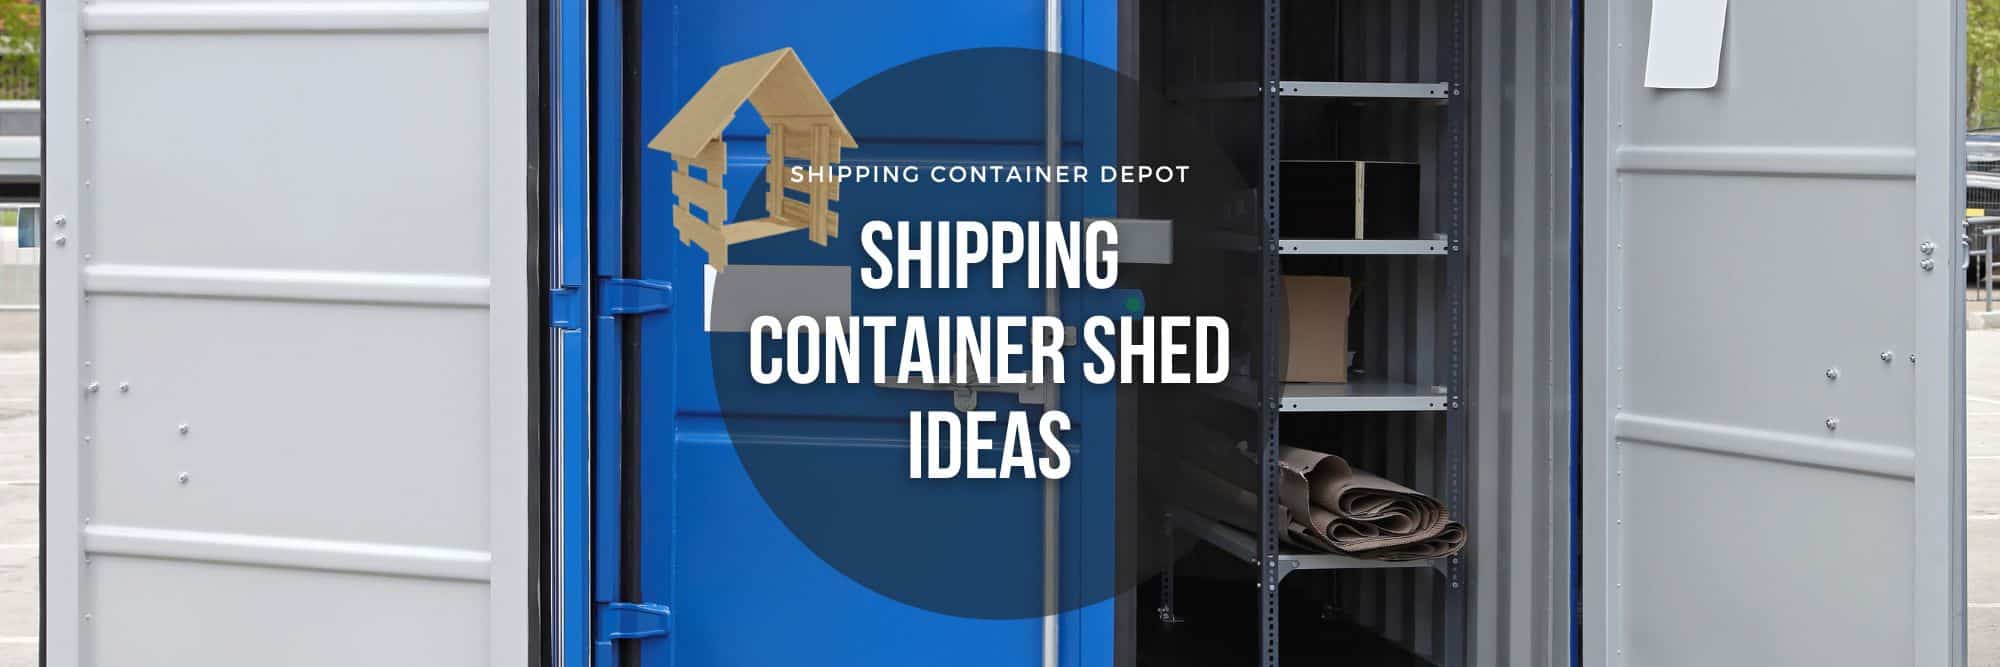 https://www.shippingcontainerdepot.com/wp-content/uploads/2023/02/Shipping-Container-Shed-Ideas.jpg